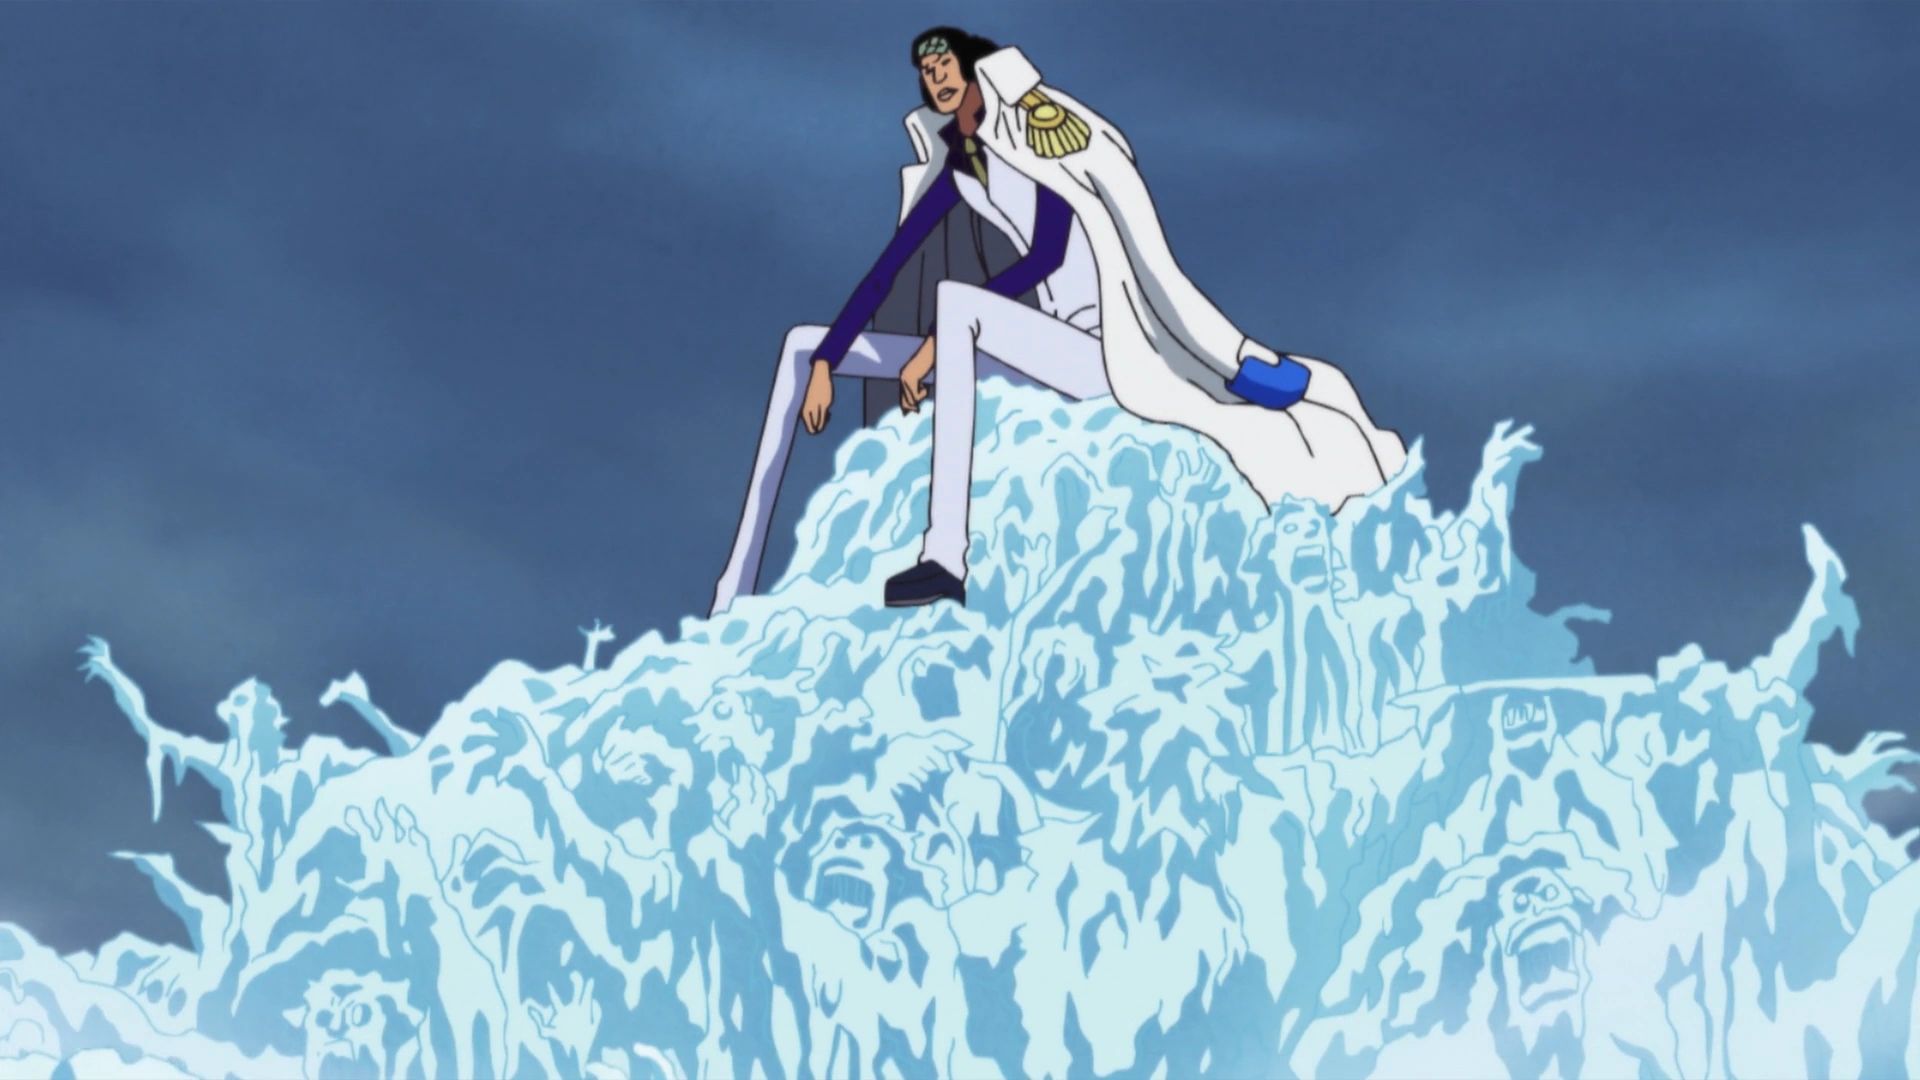 Screenshot from One Piece anime Marineford arc shows Admiral Aokiji sitting ontop of a group of frozen pirates.